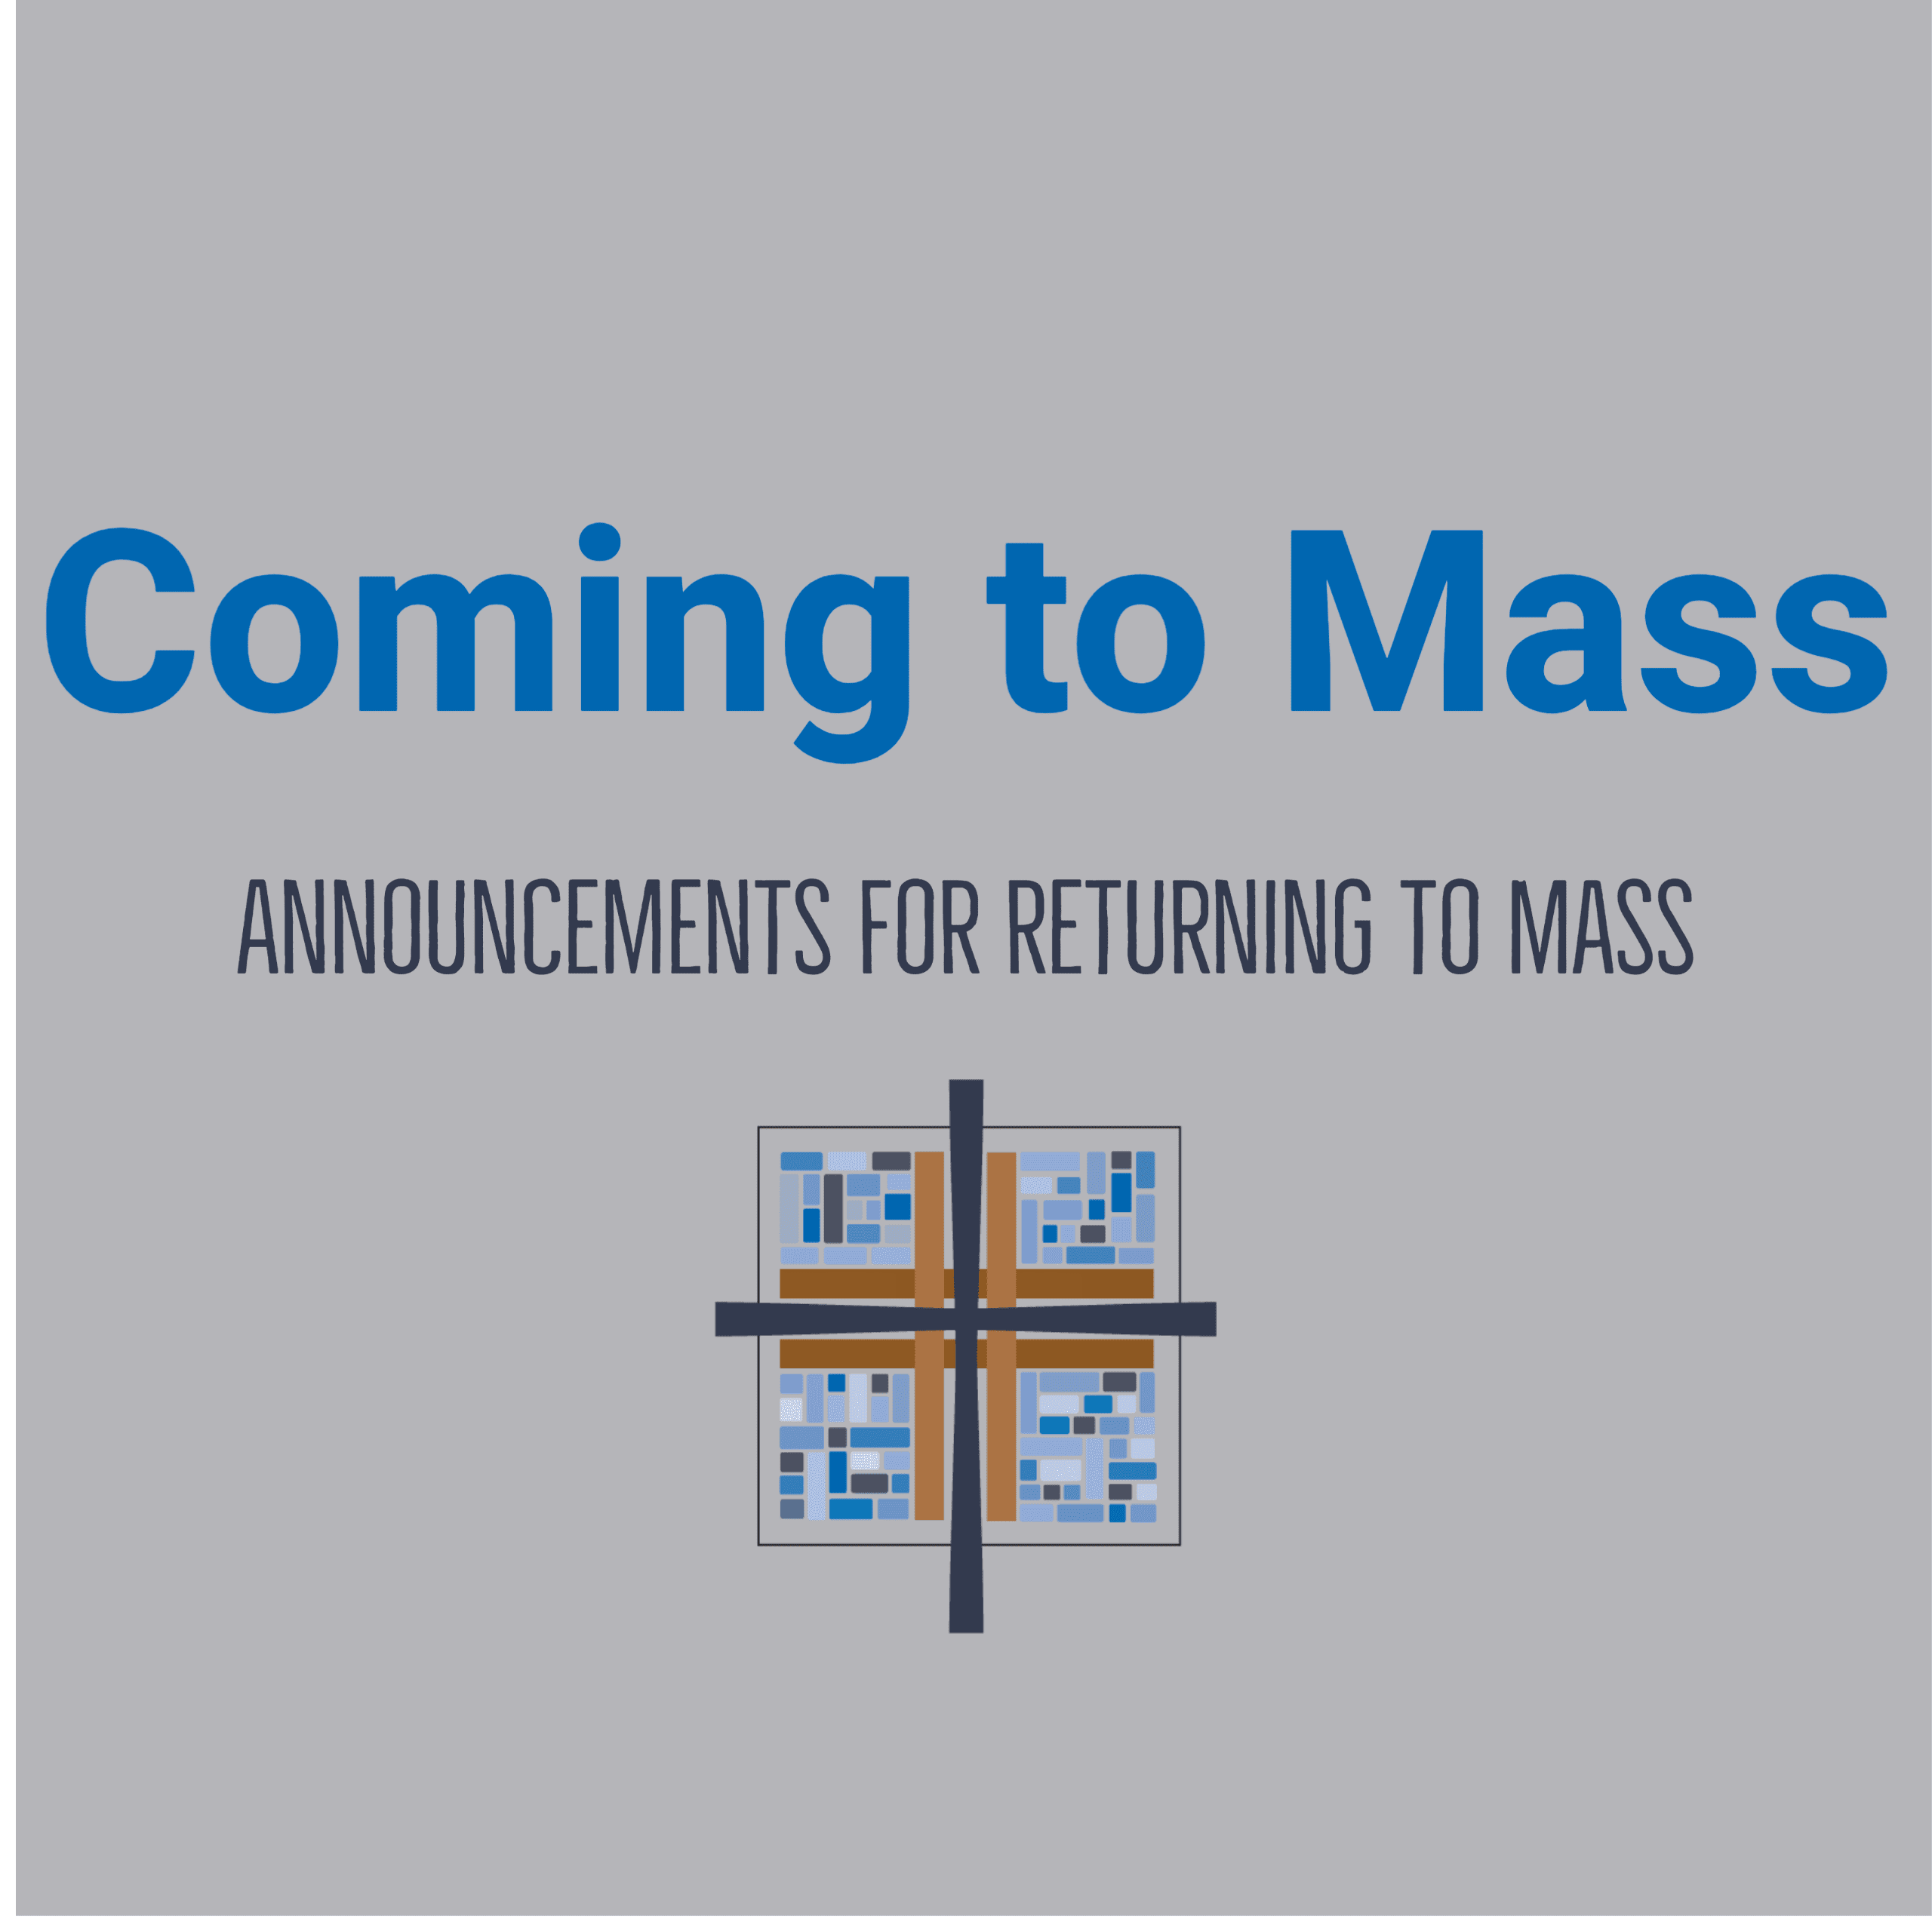 Transfiguration Catholic Church Welcomes You Back! Gathering for Mass Guidelines